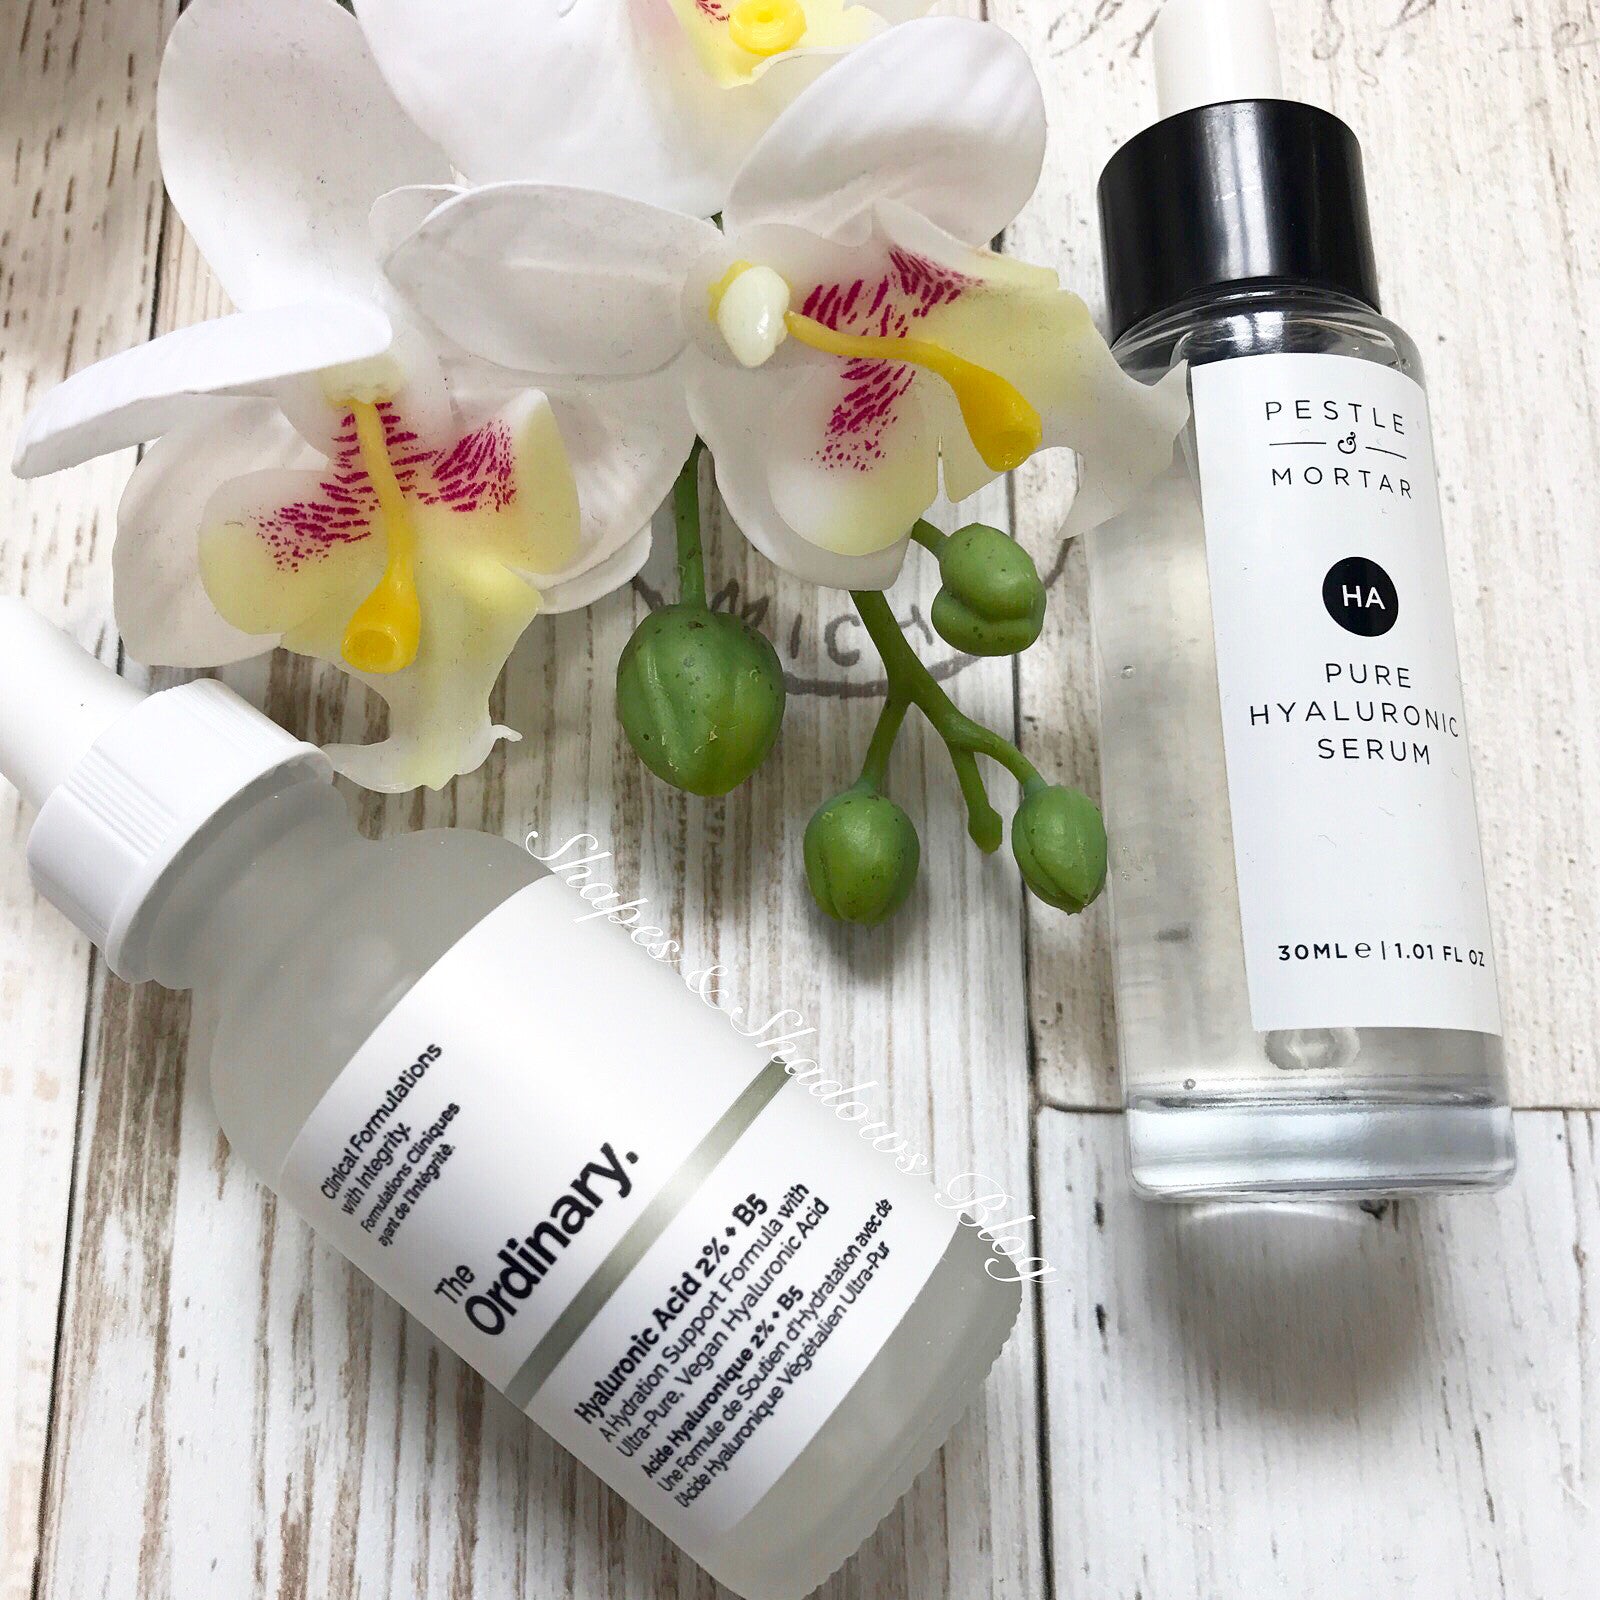 Guest Post - Pestle & Mortor Hyaluronic Acid Vs The Ordinary Skincare Hyaluronic Acid - By Shapes & Shadows Blog